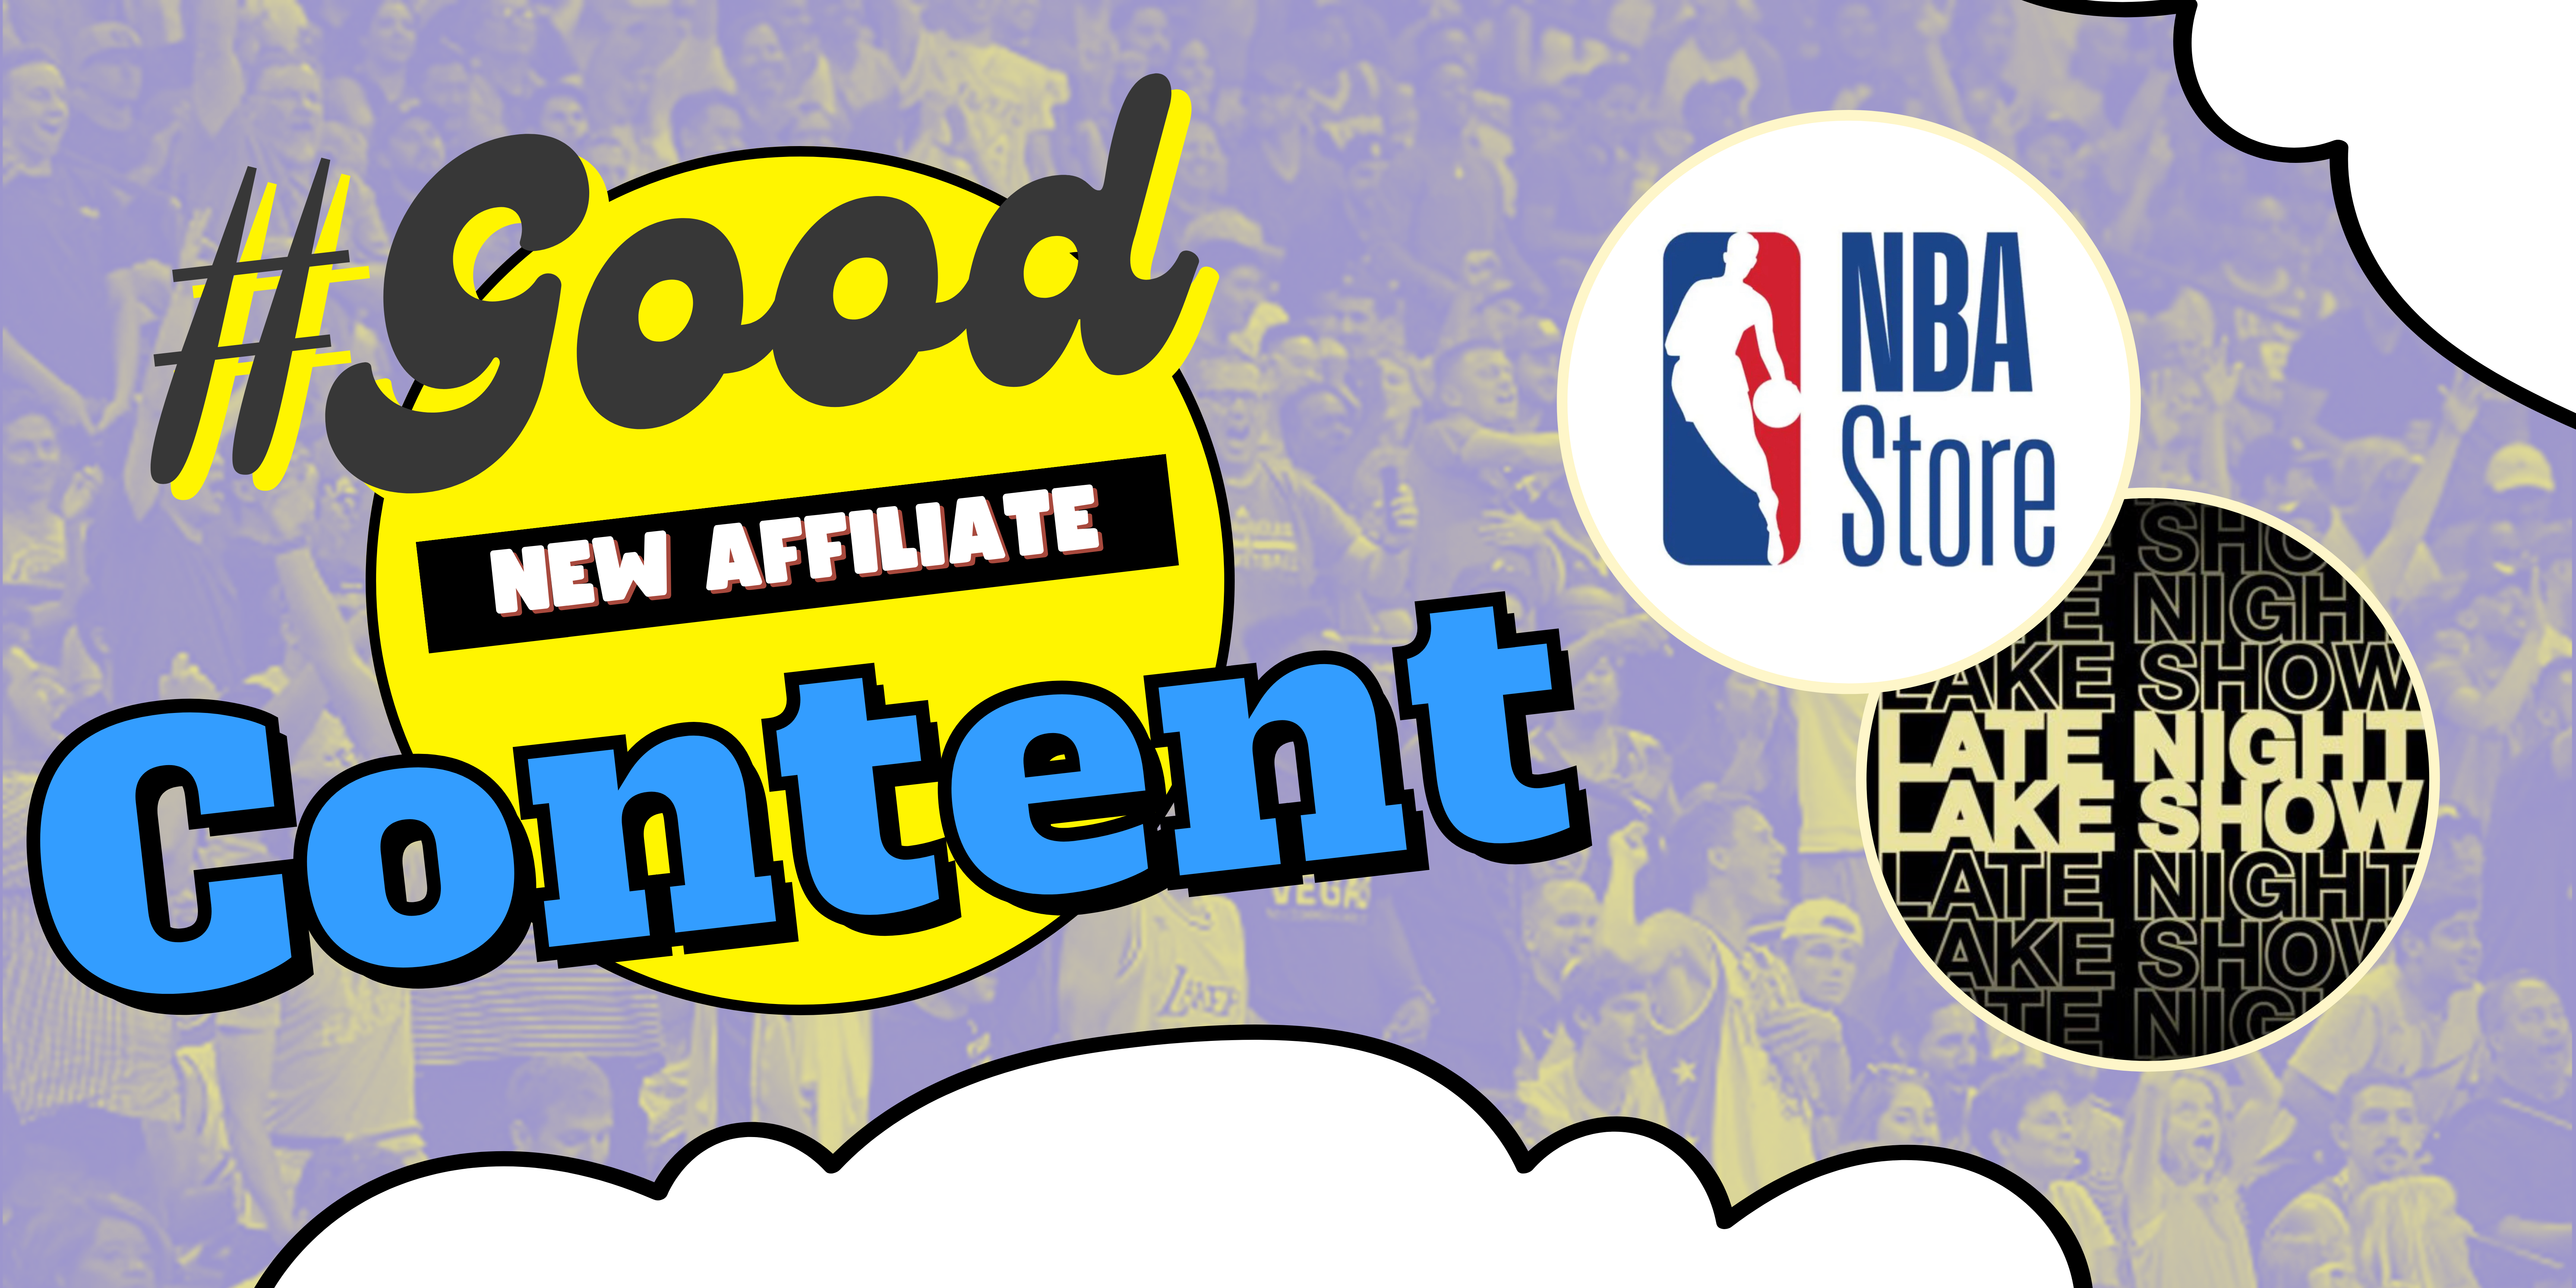 A banner image of the late night lake show podcast logo, which is a purple and yellow microphone with the words ‘late night lake show’ on it, and the NBA Store logo, which is a red and blue basketball with the words ‘NBA Store’ on it. The banner also has white text that reads ‘new affiliate’.”